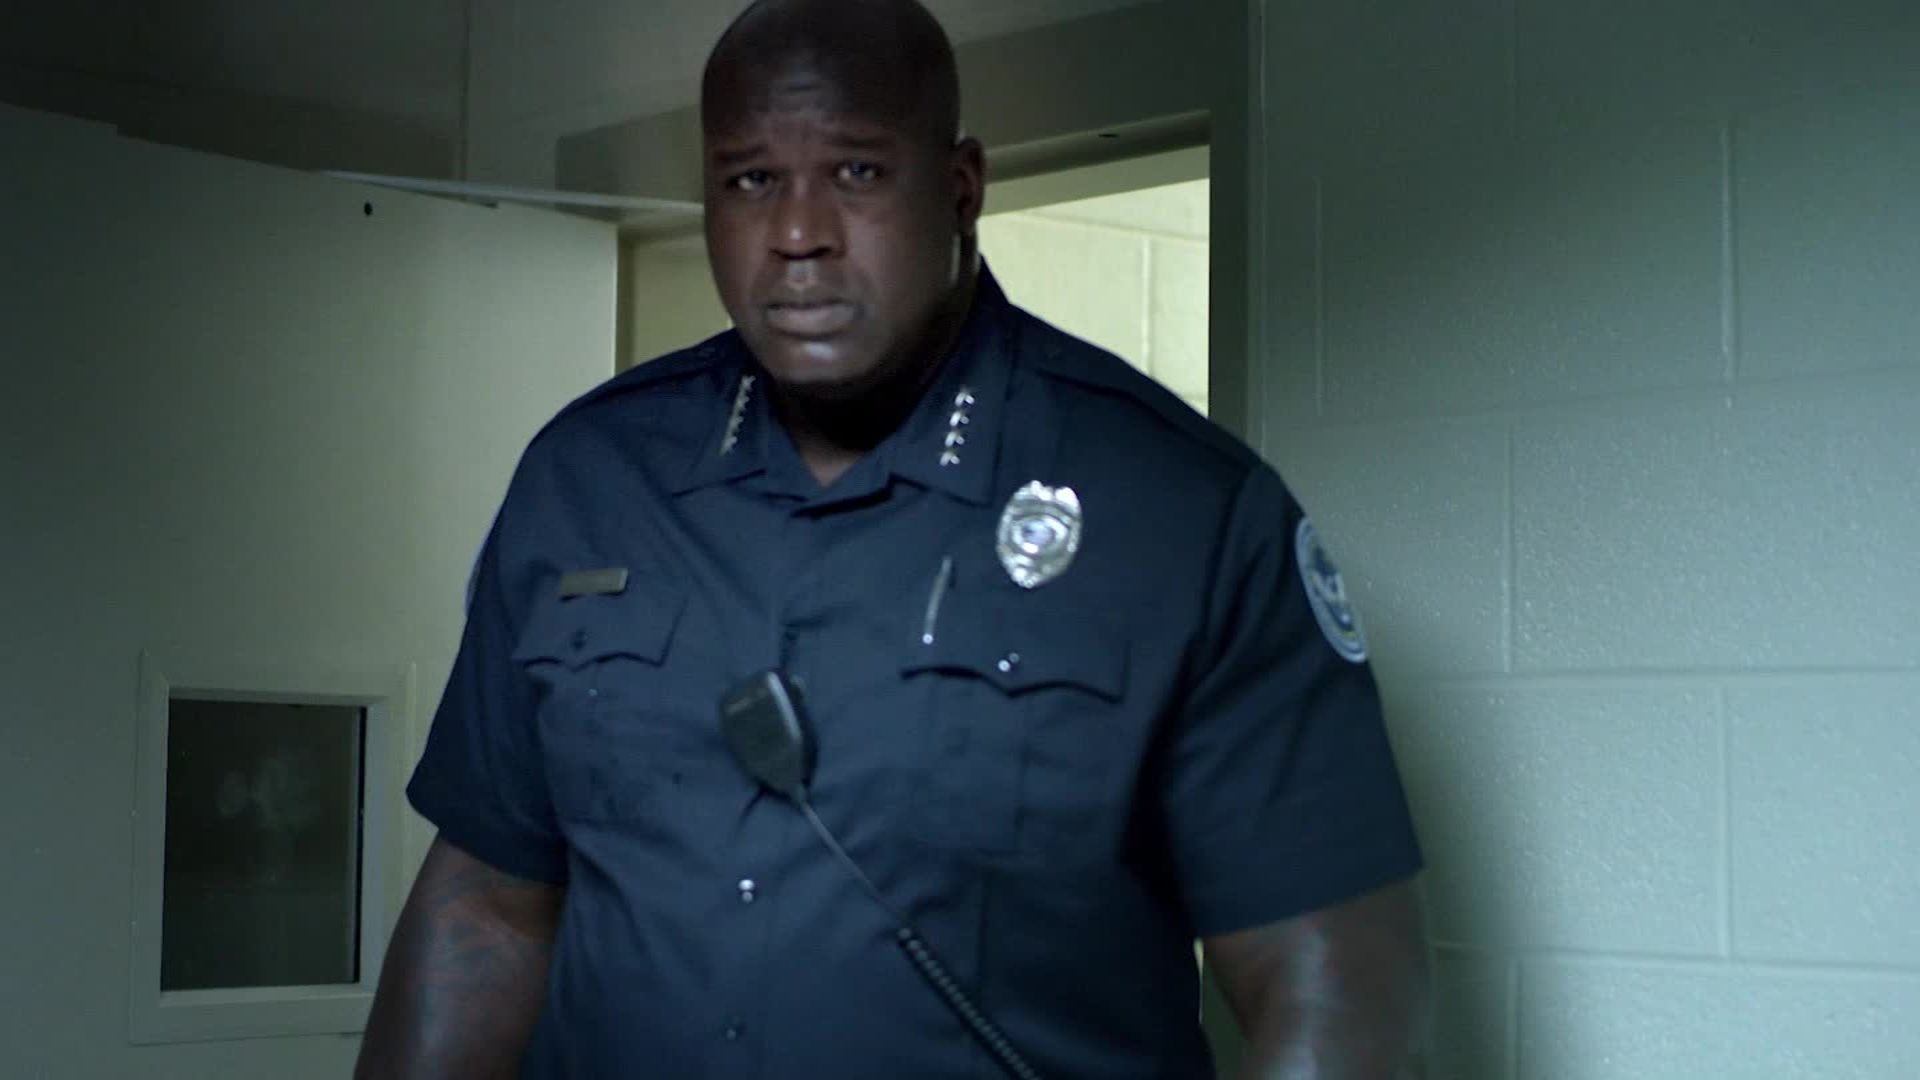 Shaq plays police chief for a day - CNN Video